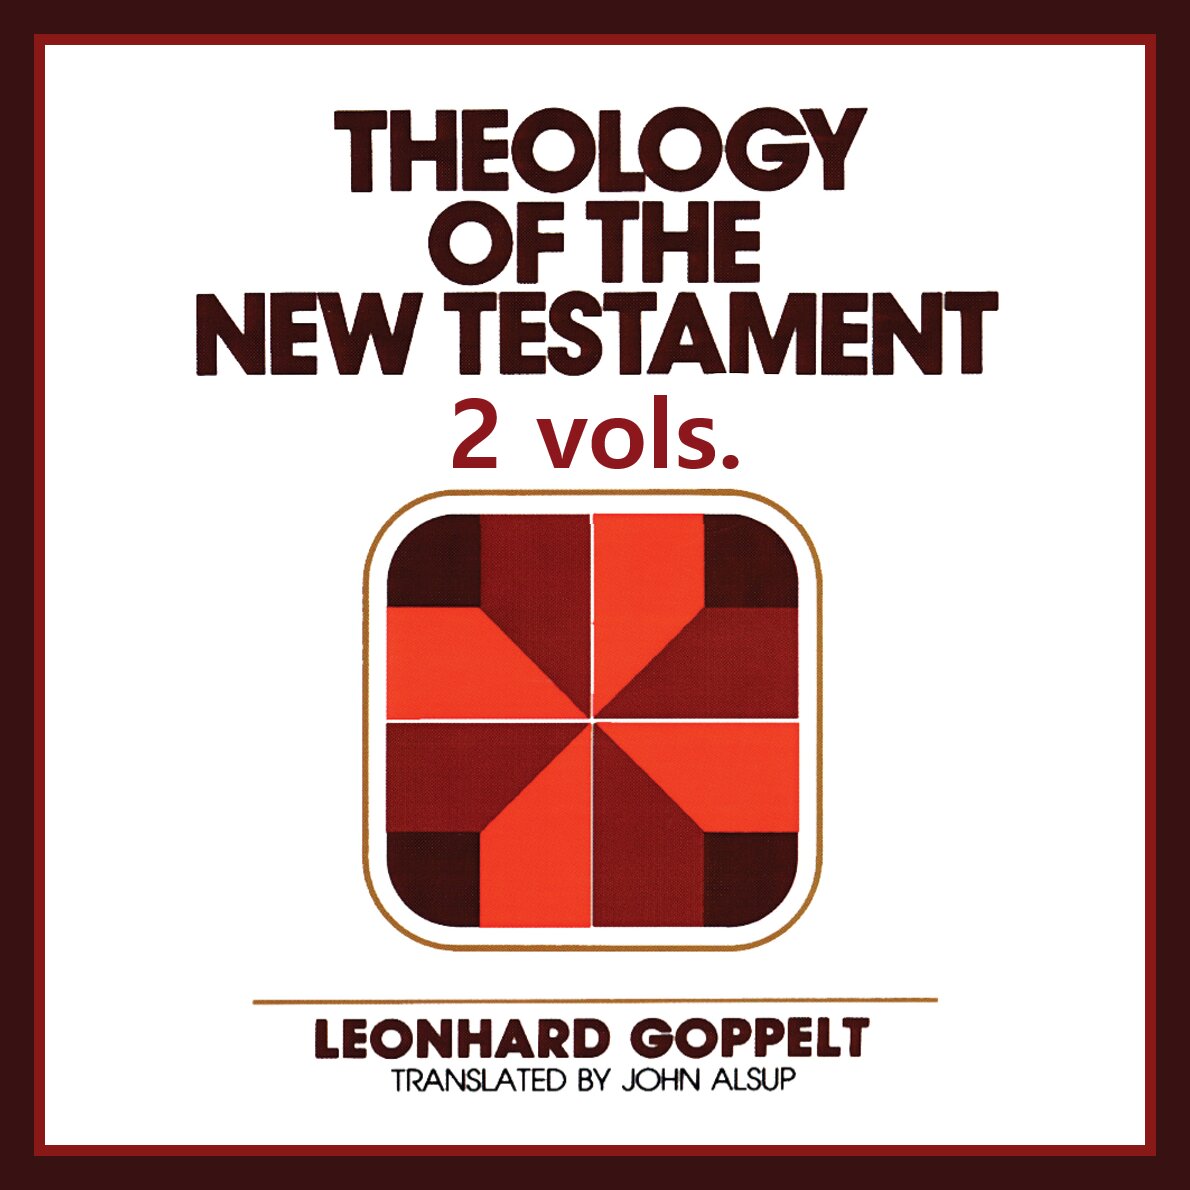 Theology of the New Testament (2 vols.)